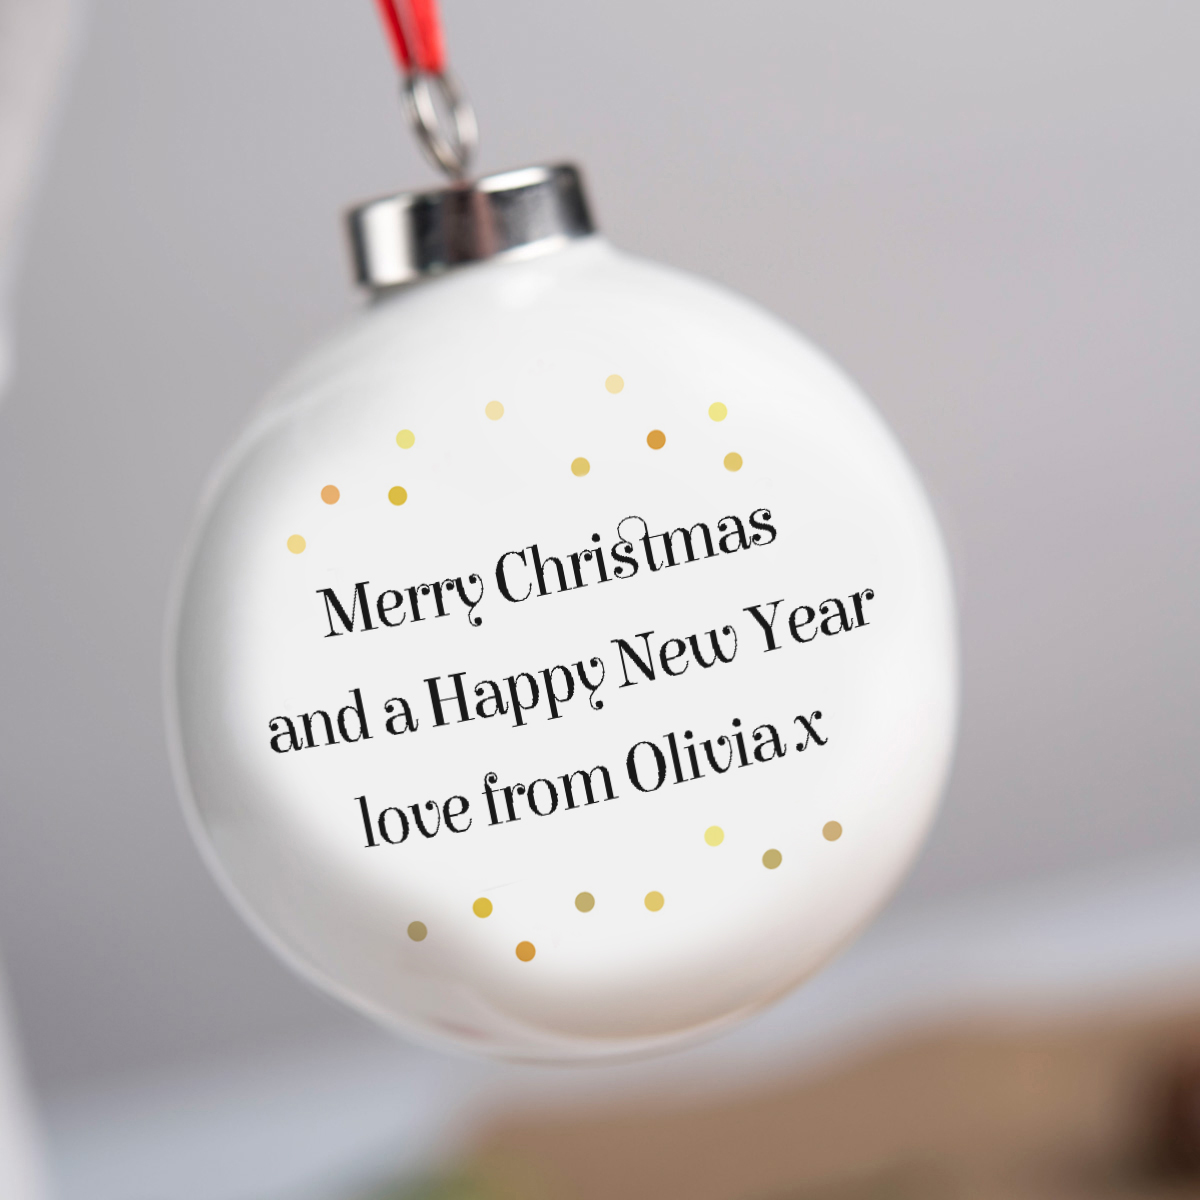 Personalised Bauble - Merry Christmas Gold